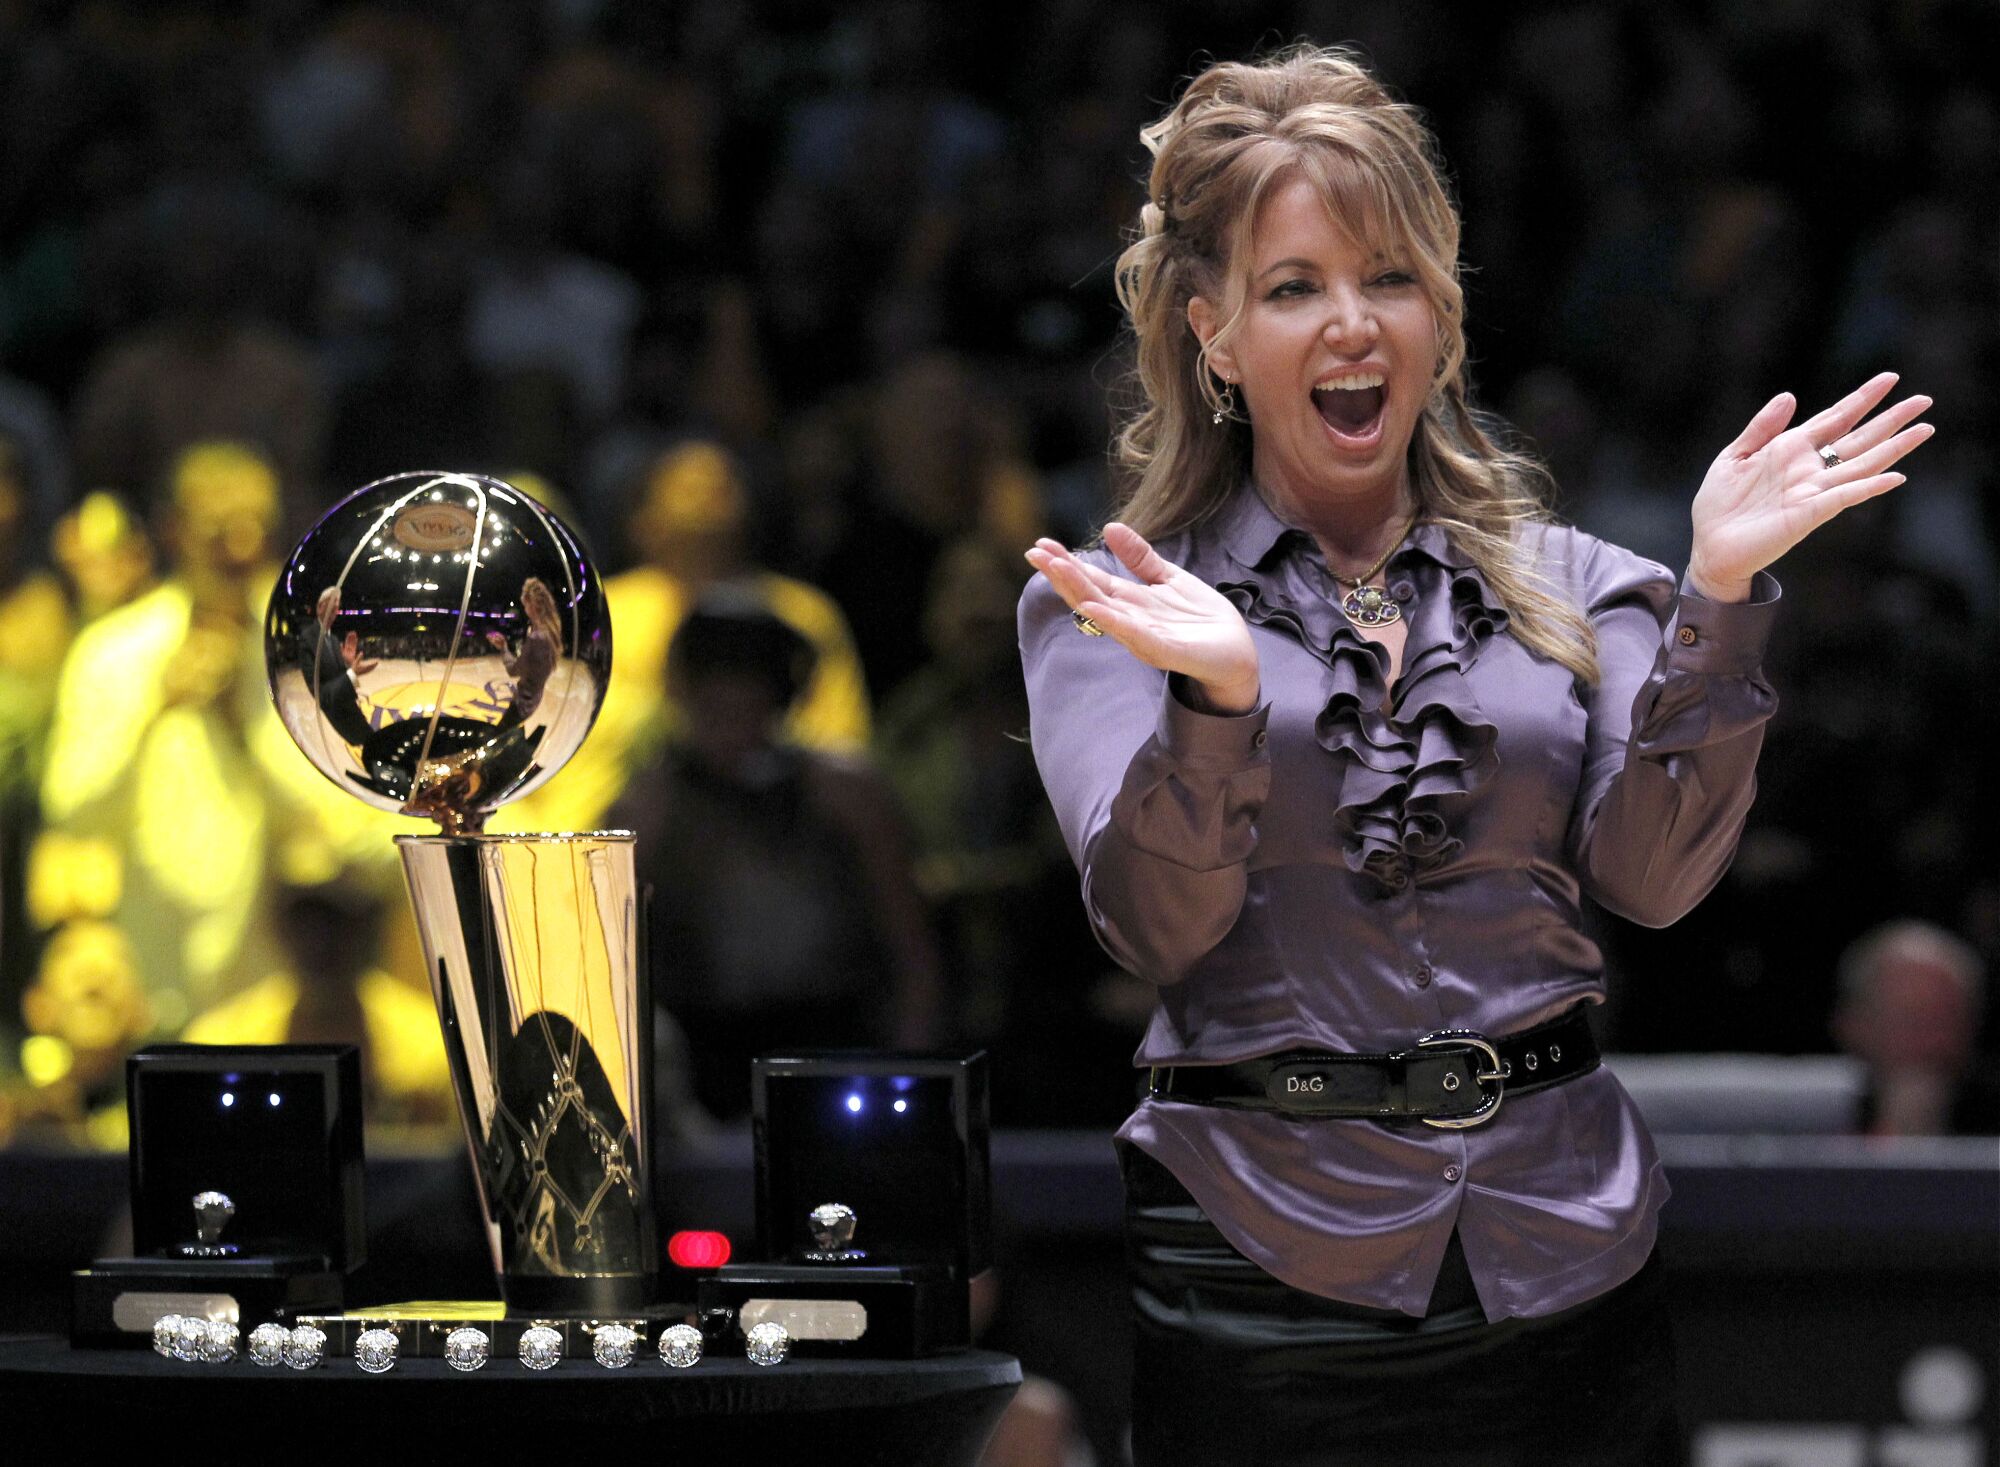 Lakers president and governor Jeanie Buss claps during the Lakers' NBA championship ring ceremony in 2010.